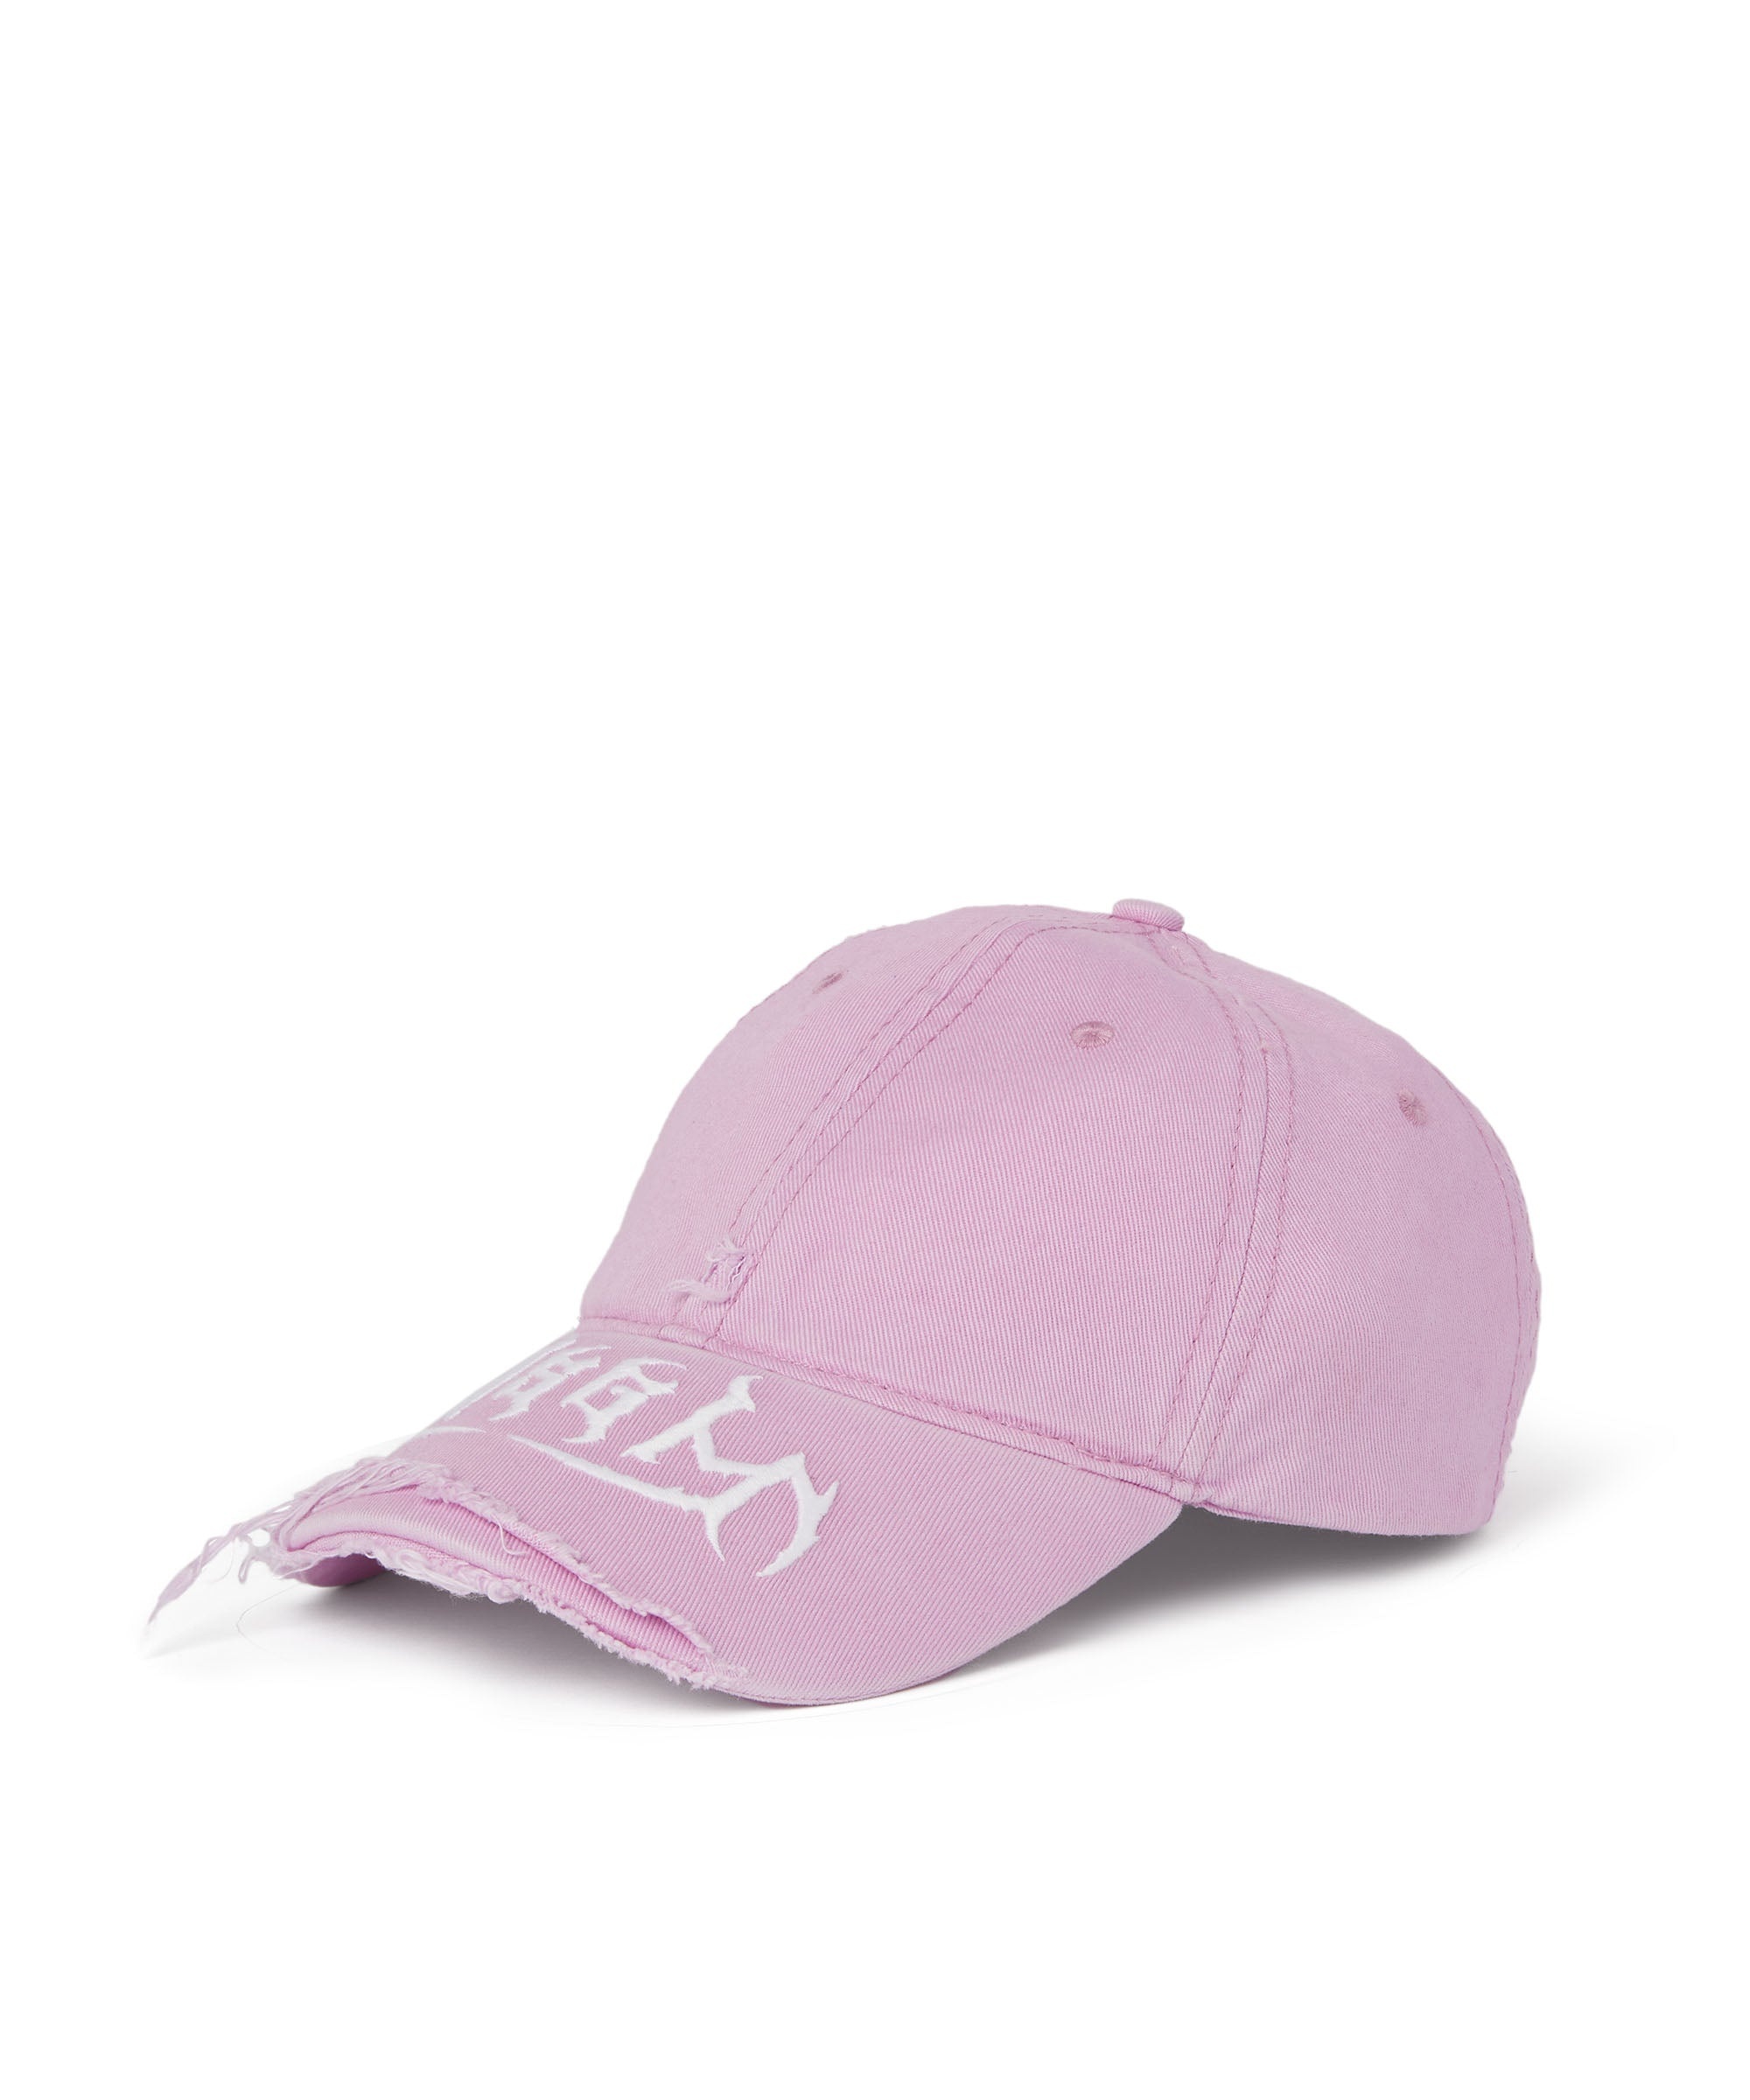 Gabardine cotton baseball cap with distressed effect and embroidered label - 1